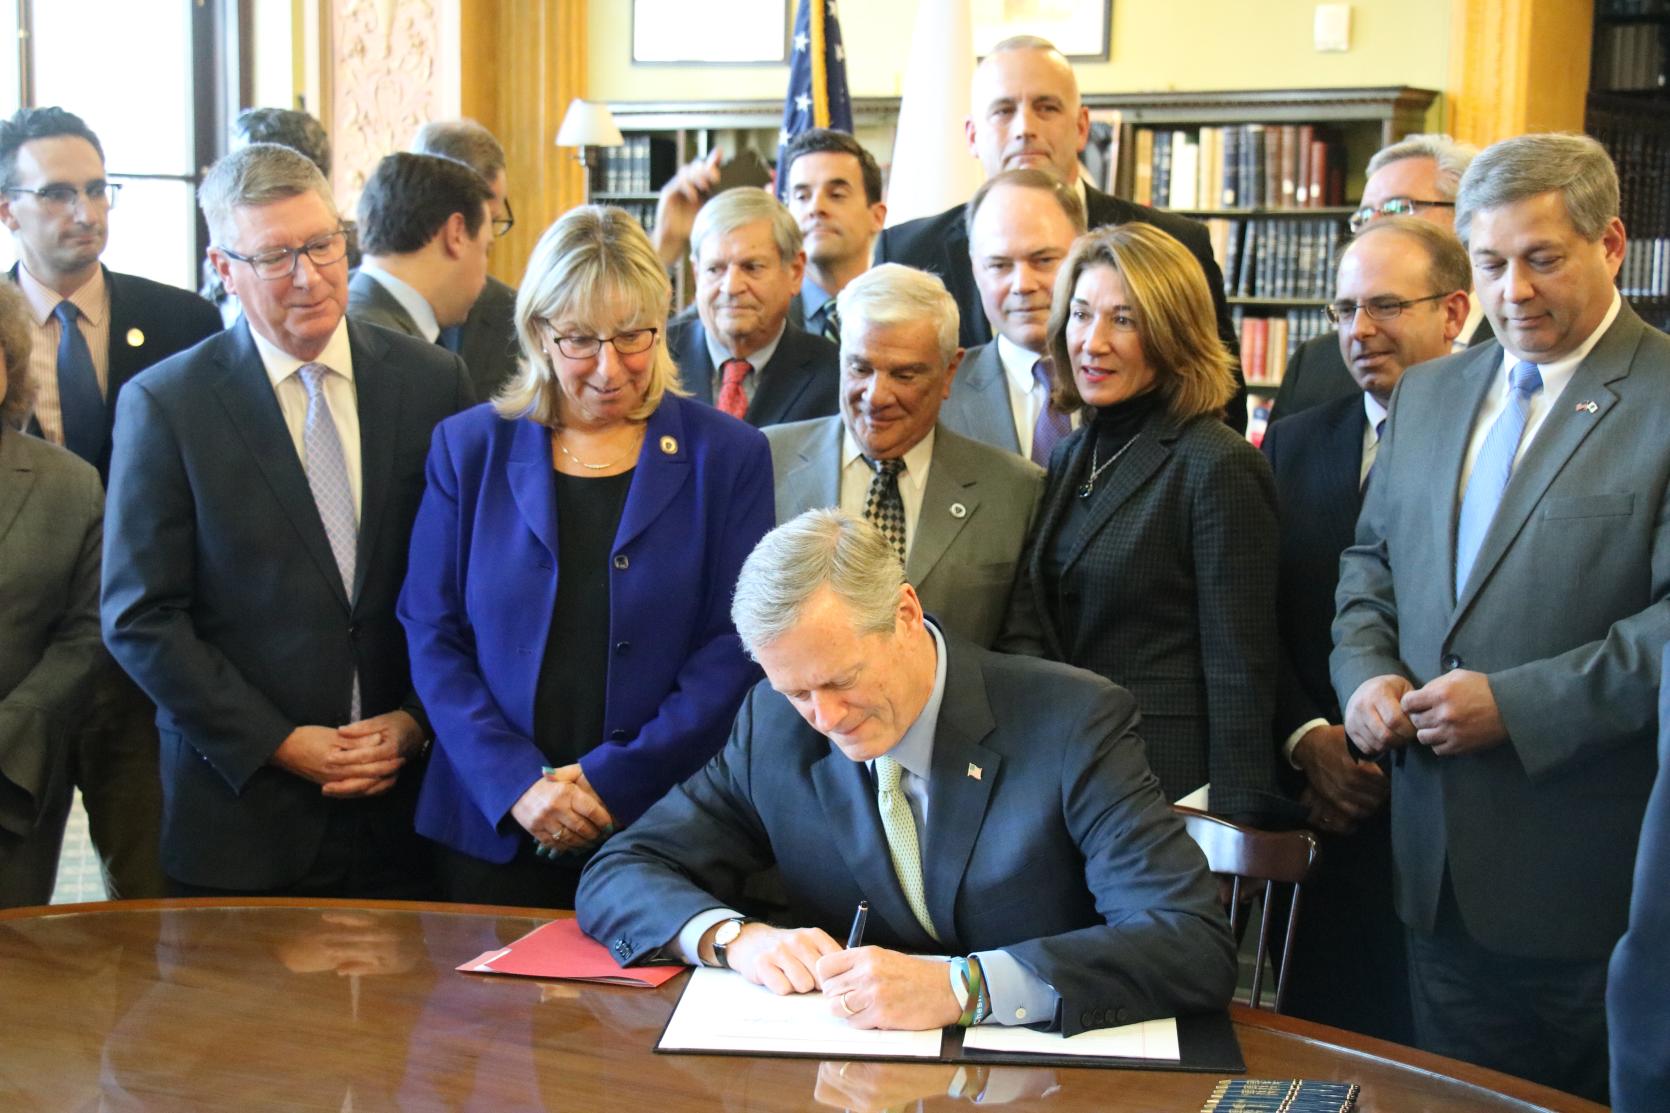 Governor Baker Signs Legislation Requiring Hands-Free Use of Electronic Devices While Driving